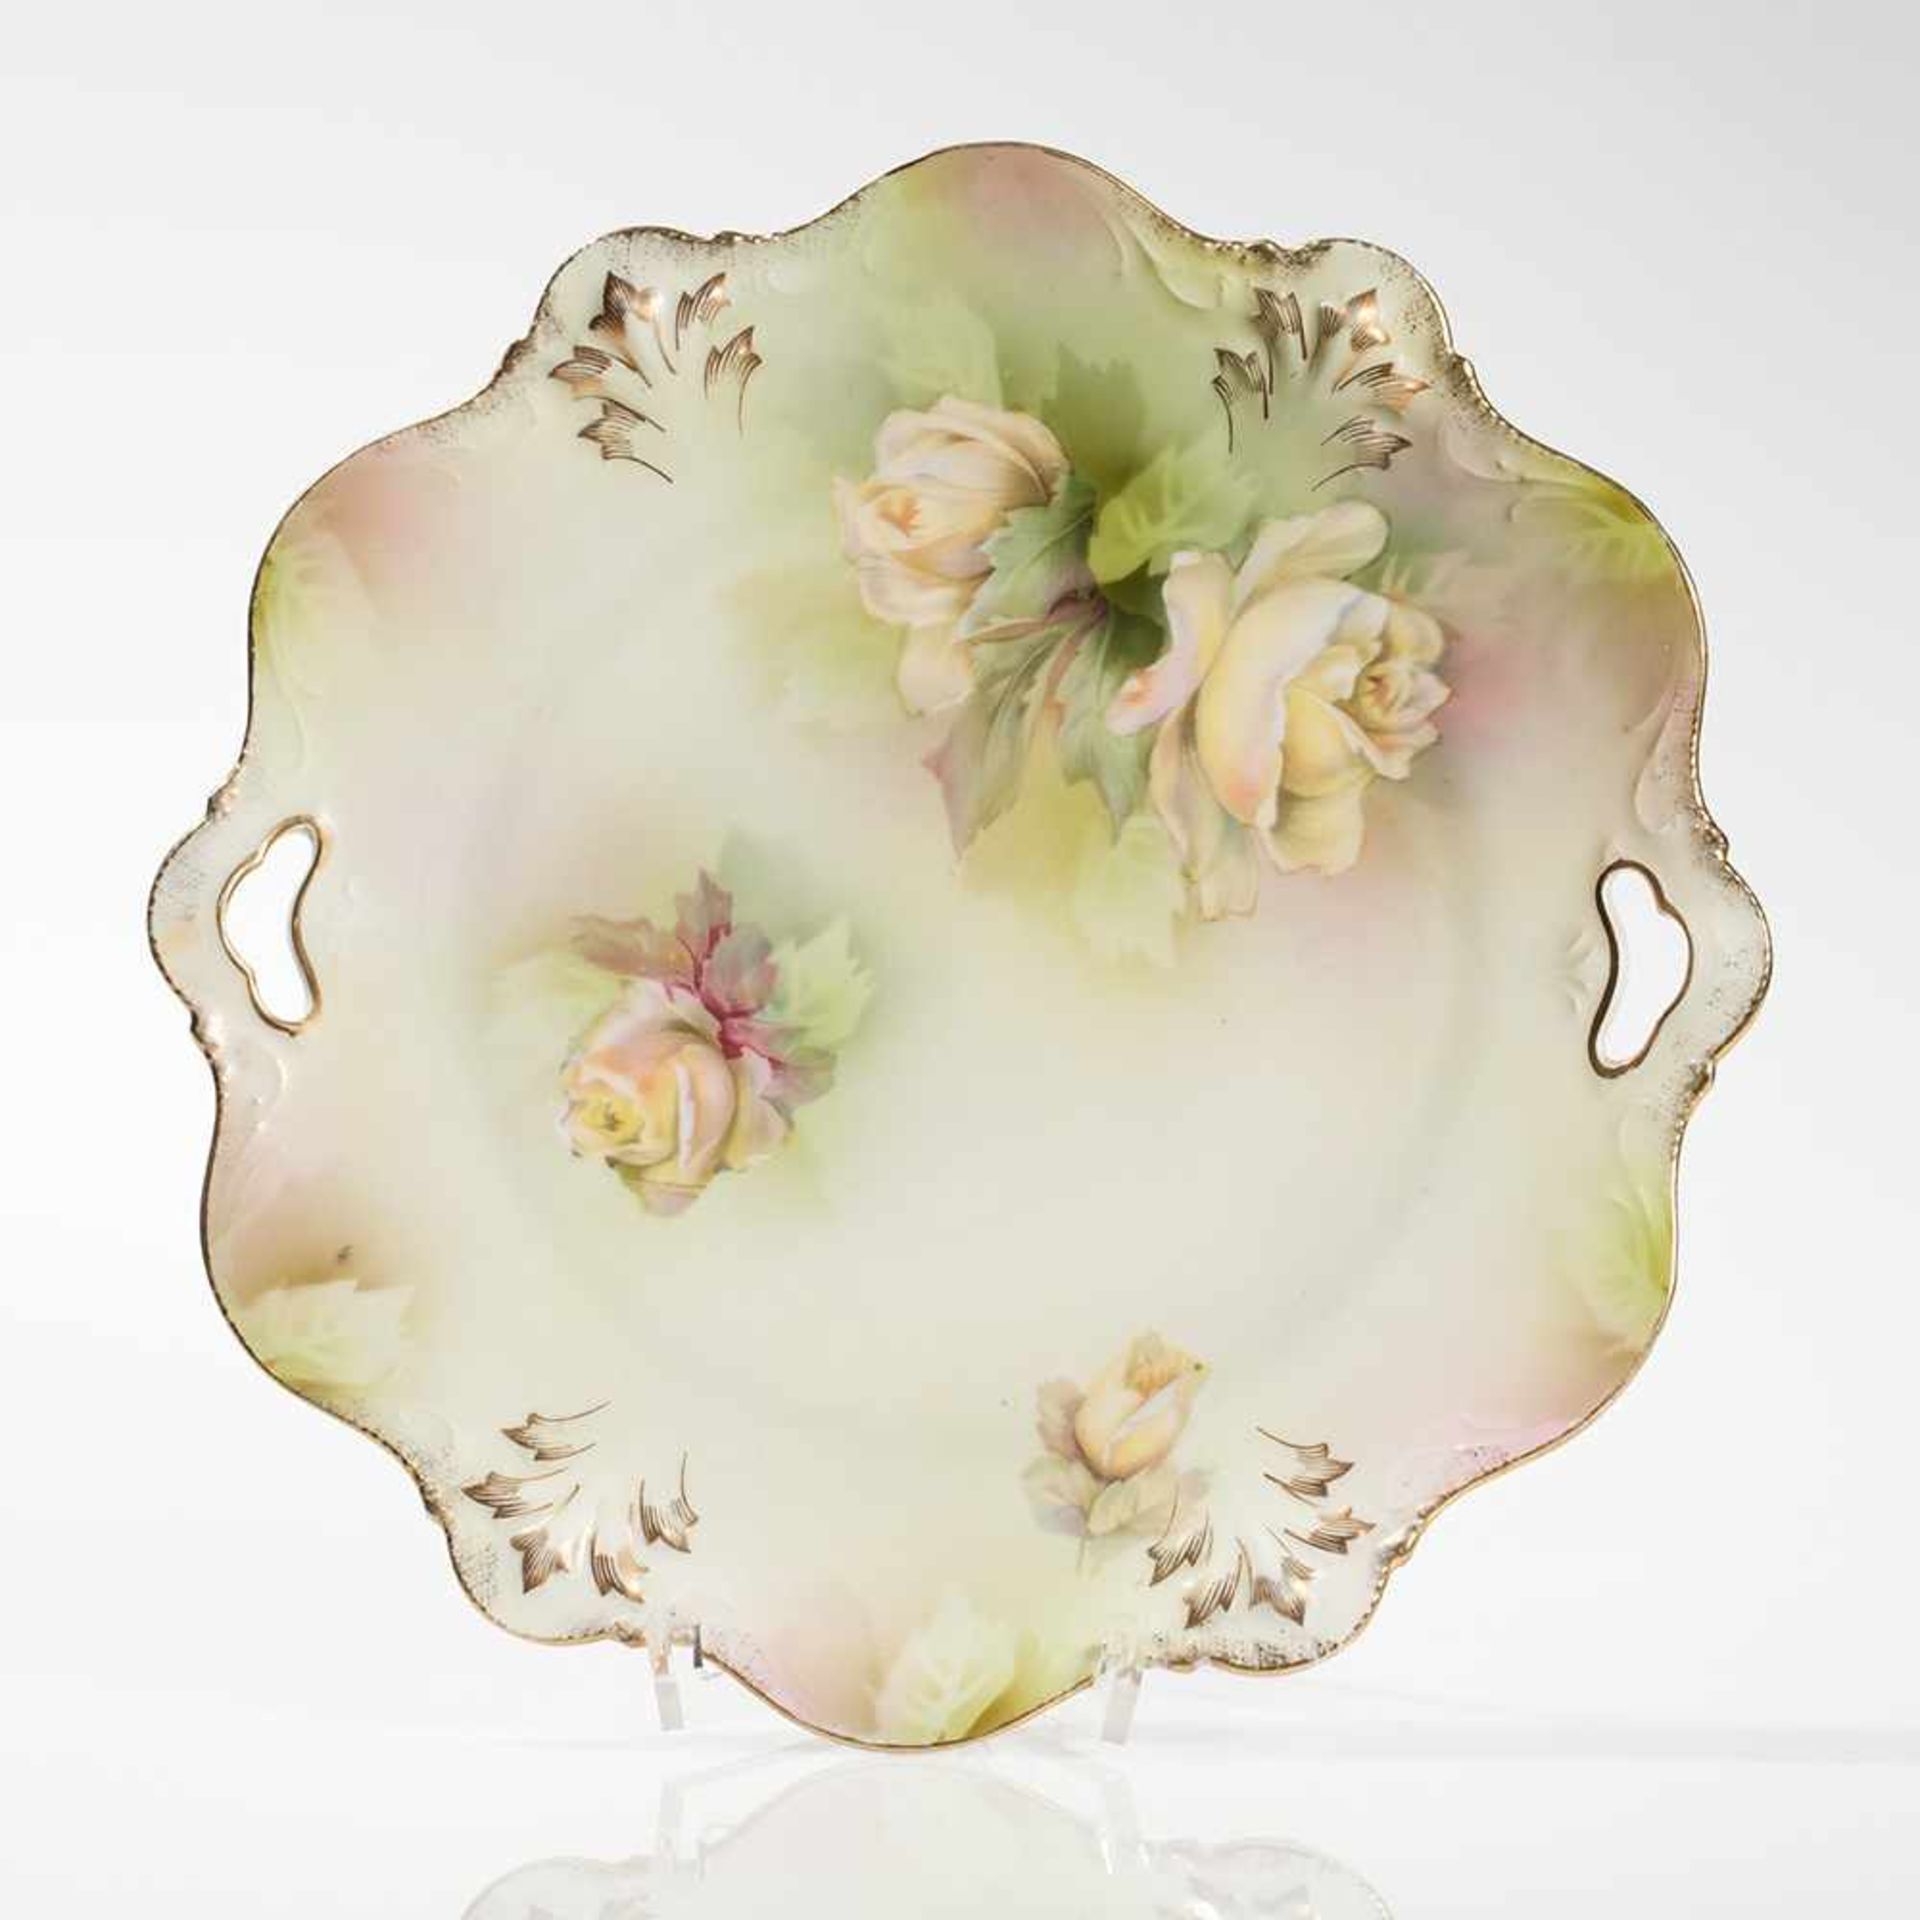 Confectionary Plate with Rose Décor by R.S. Prussia, ca. 1900 R.S. Prussia, Germany, around 1900 - Bild 7 aus 7